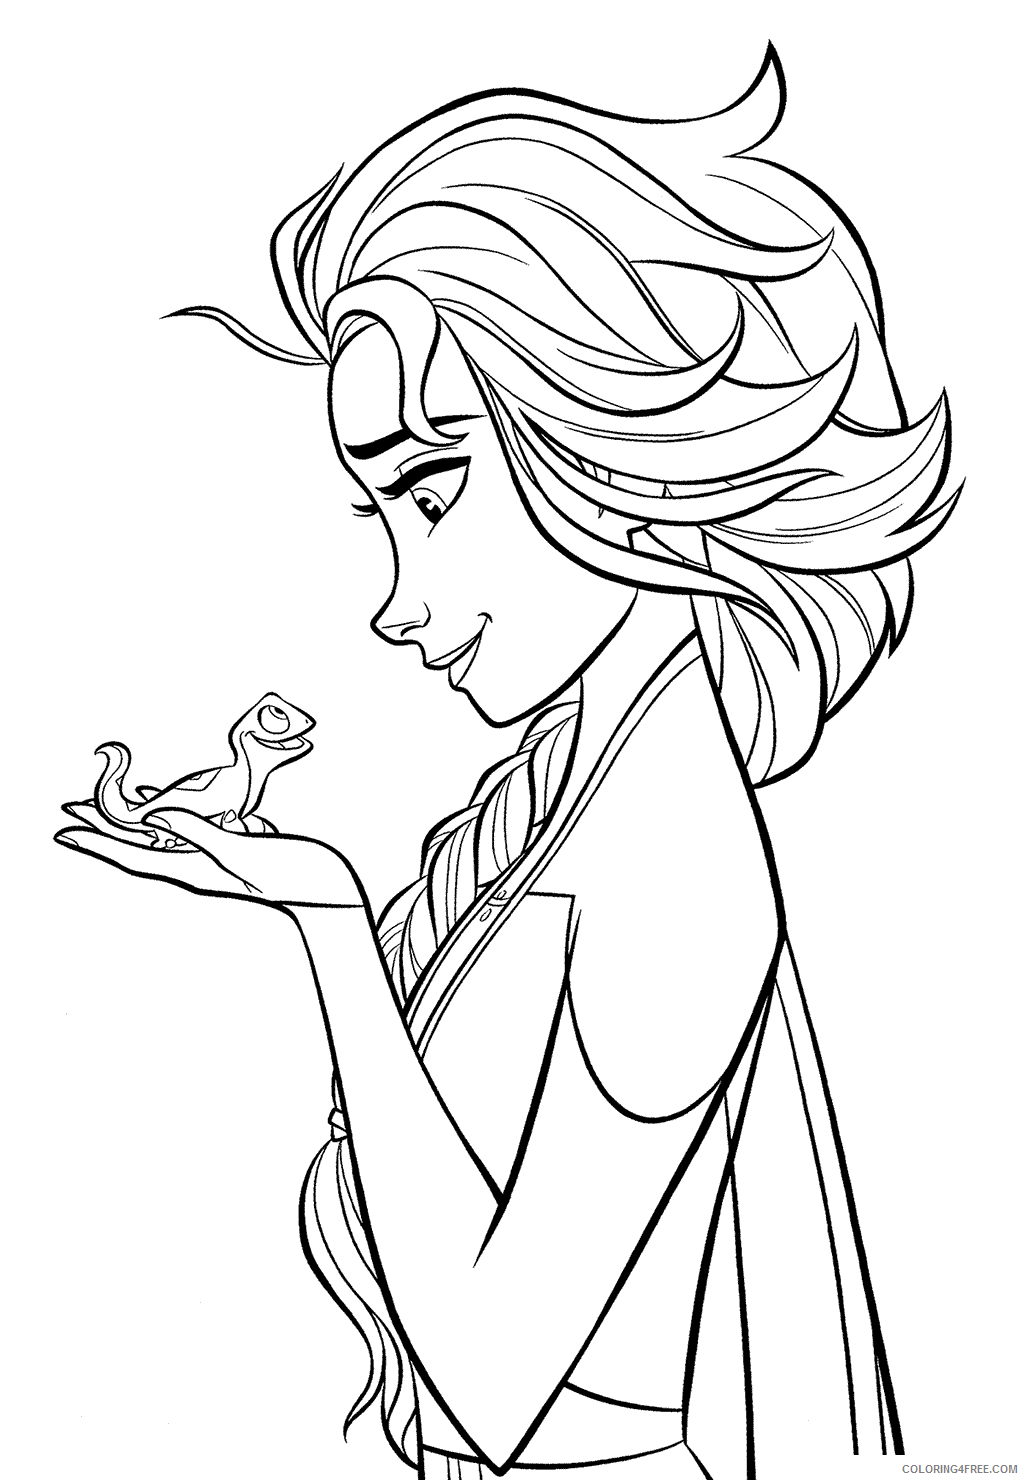 Ana Frozen 2 Coloring Pages Printable Sheets Elsa And Lizard Bruni Frozen 2021 a 5678 Coloring4free